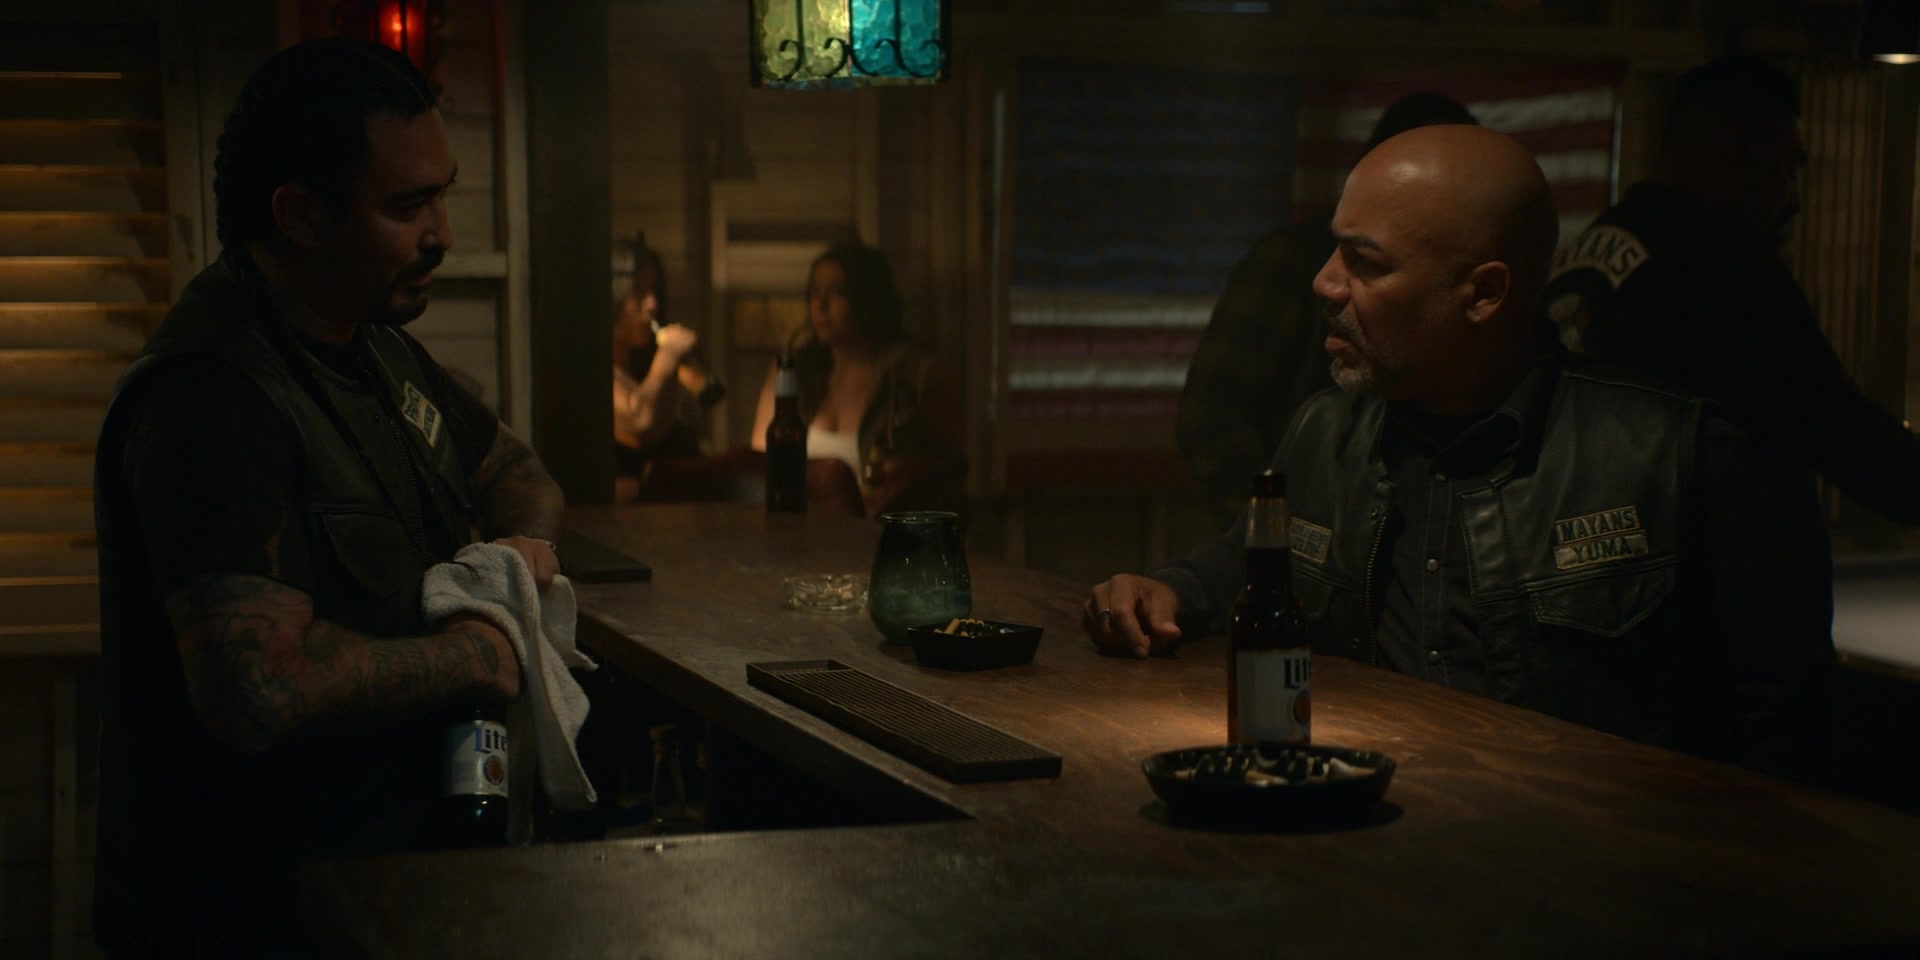 Miller Lite Beer Bottles In Mayans M.C. S04E08 "The Righteous Wrath Of